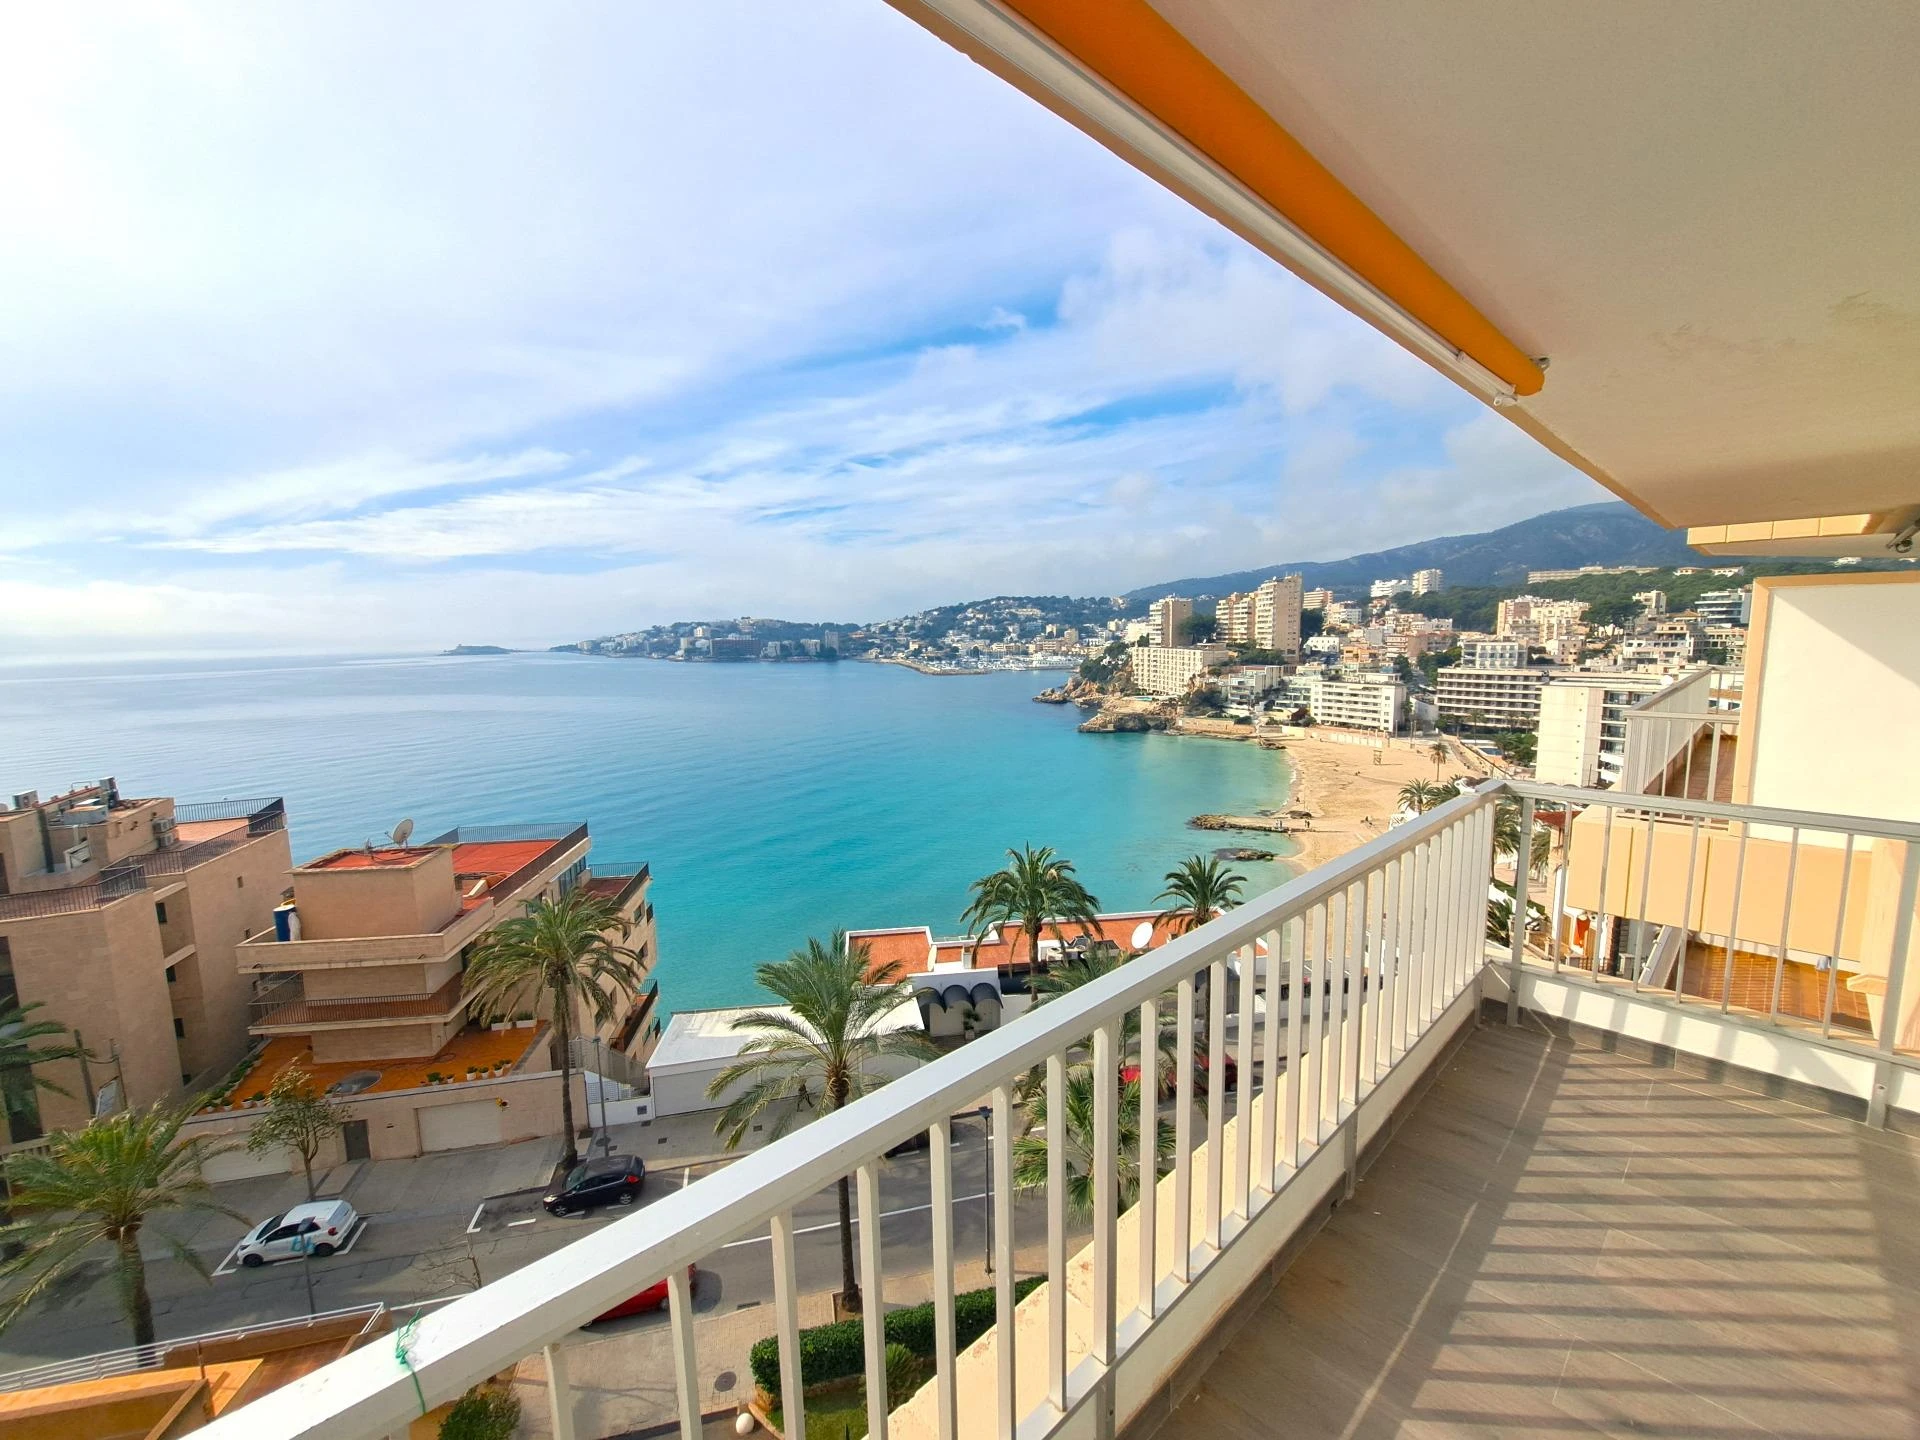 Renovated flat with large terrace and spectacular sea views, just a few steps from the beach.